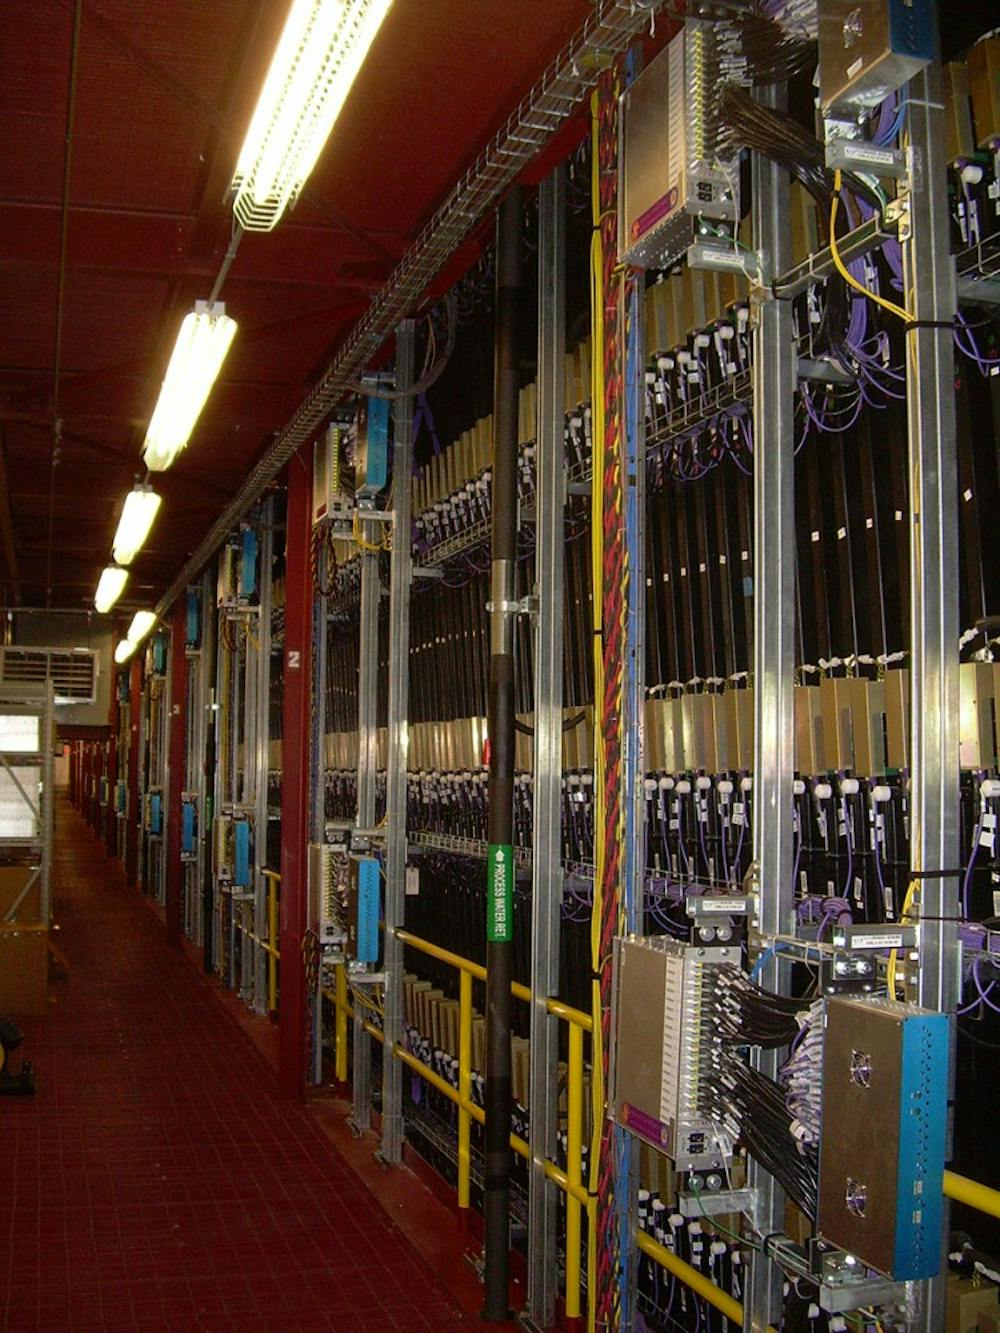 The Fermilab has two neutrino detectors, a near detector located at the lab in Illinois and a far detector located 810 kilometers away in Minnesota.&nbsp;